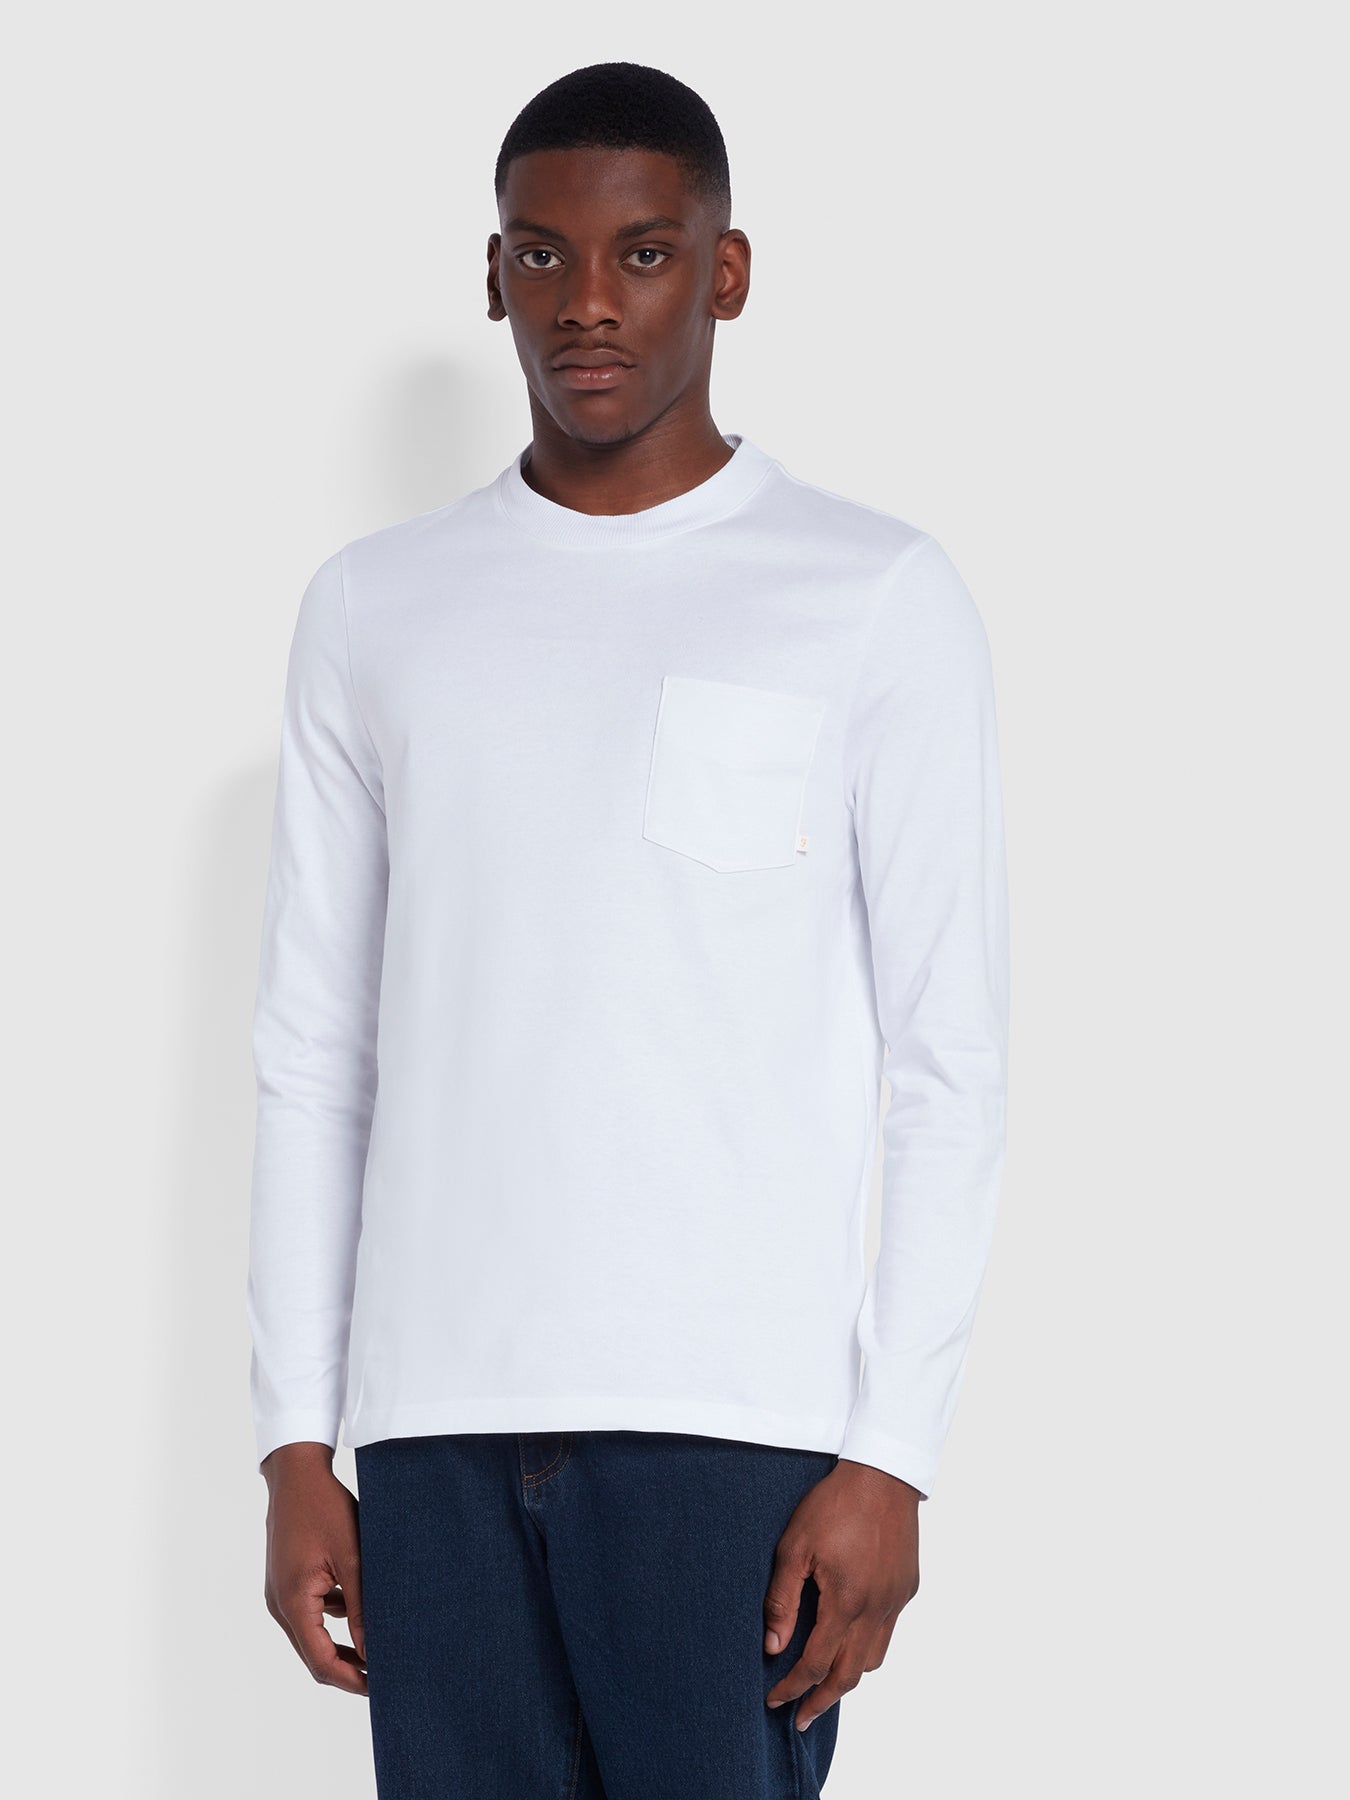 View Weymouth Regular Fit Long Sleeve Organic Cotton TShirt In White information